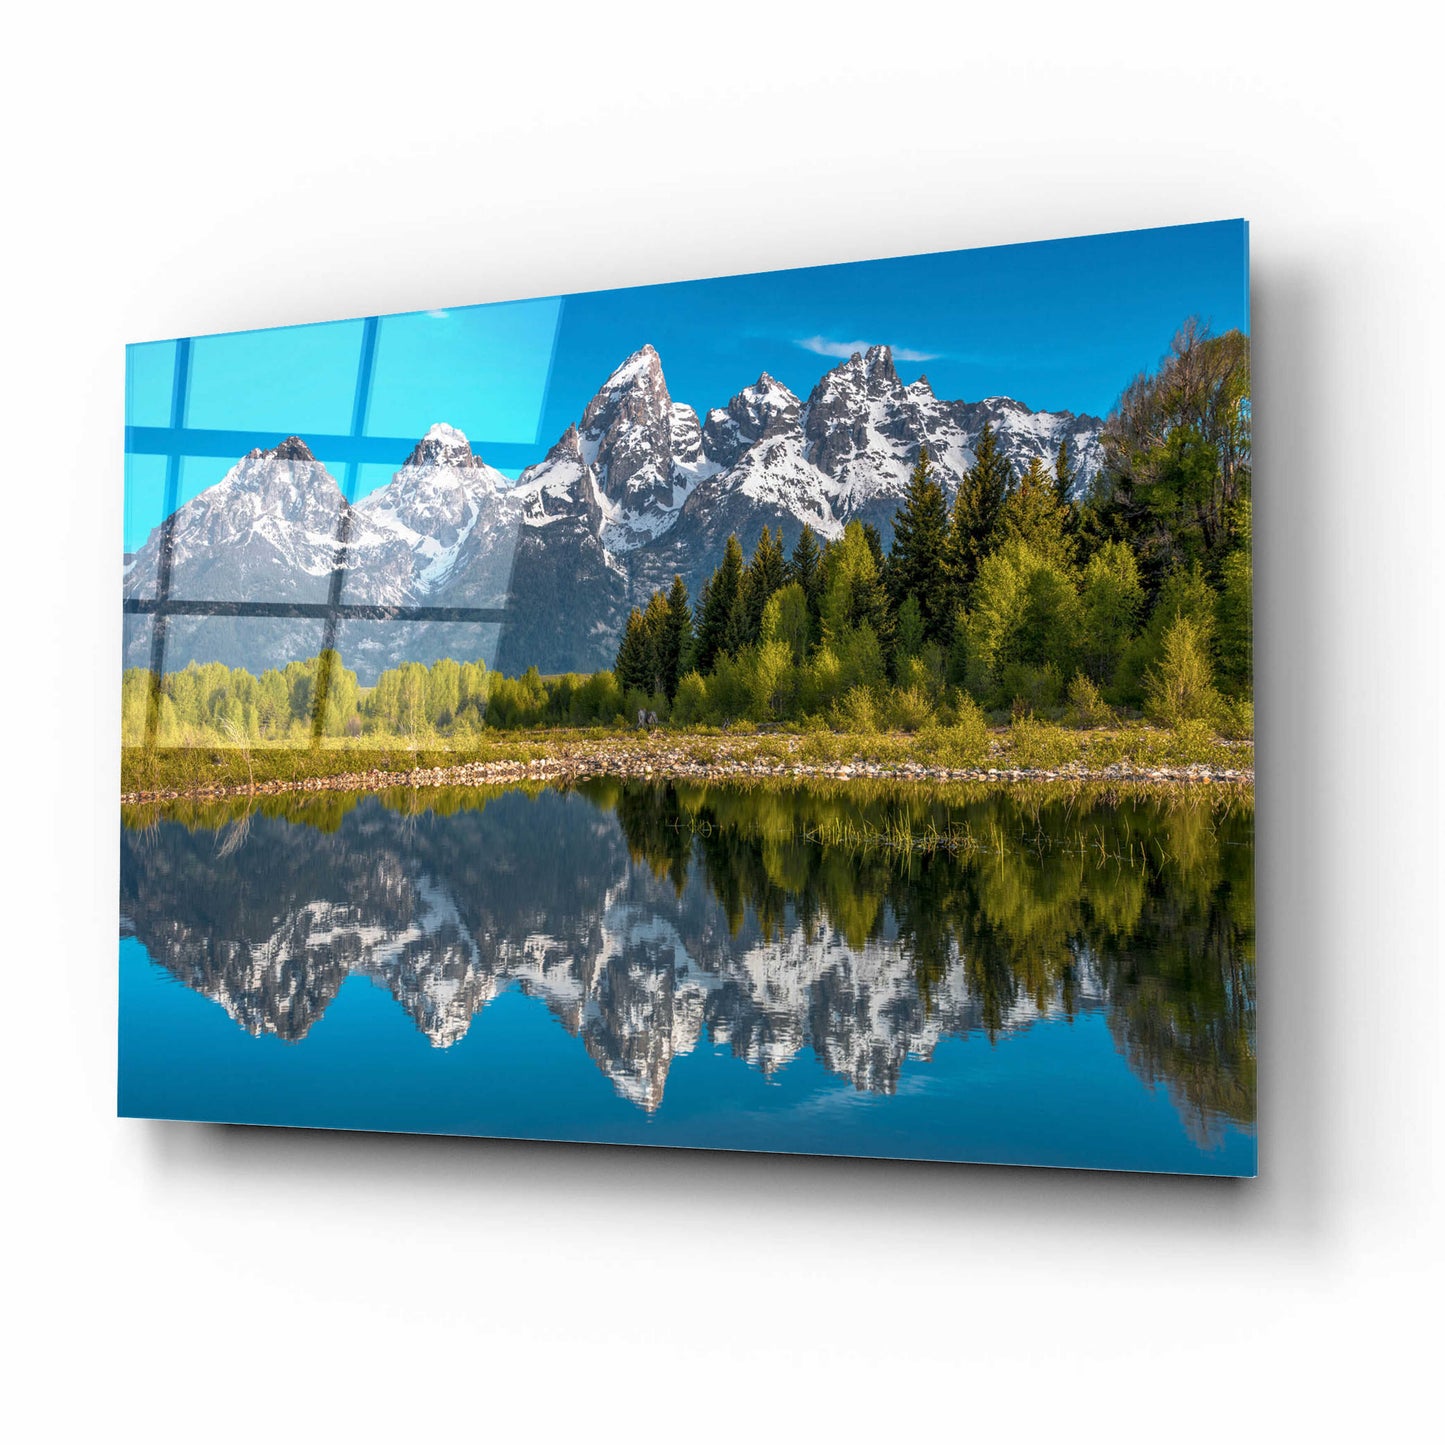 Epic Art 'Tetons in Color - Grand Teton National Park' by Darren White, Acrylic Glass Wall Art,16x12